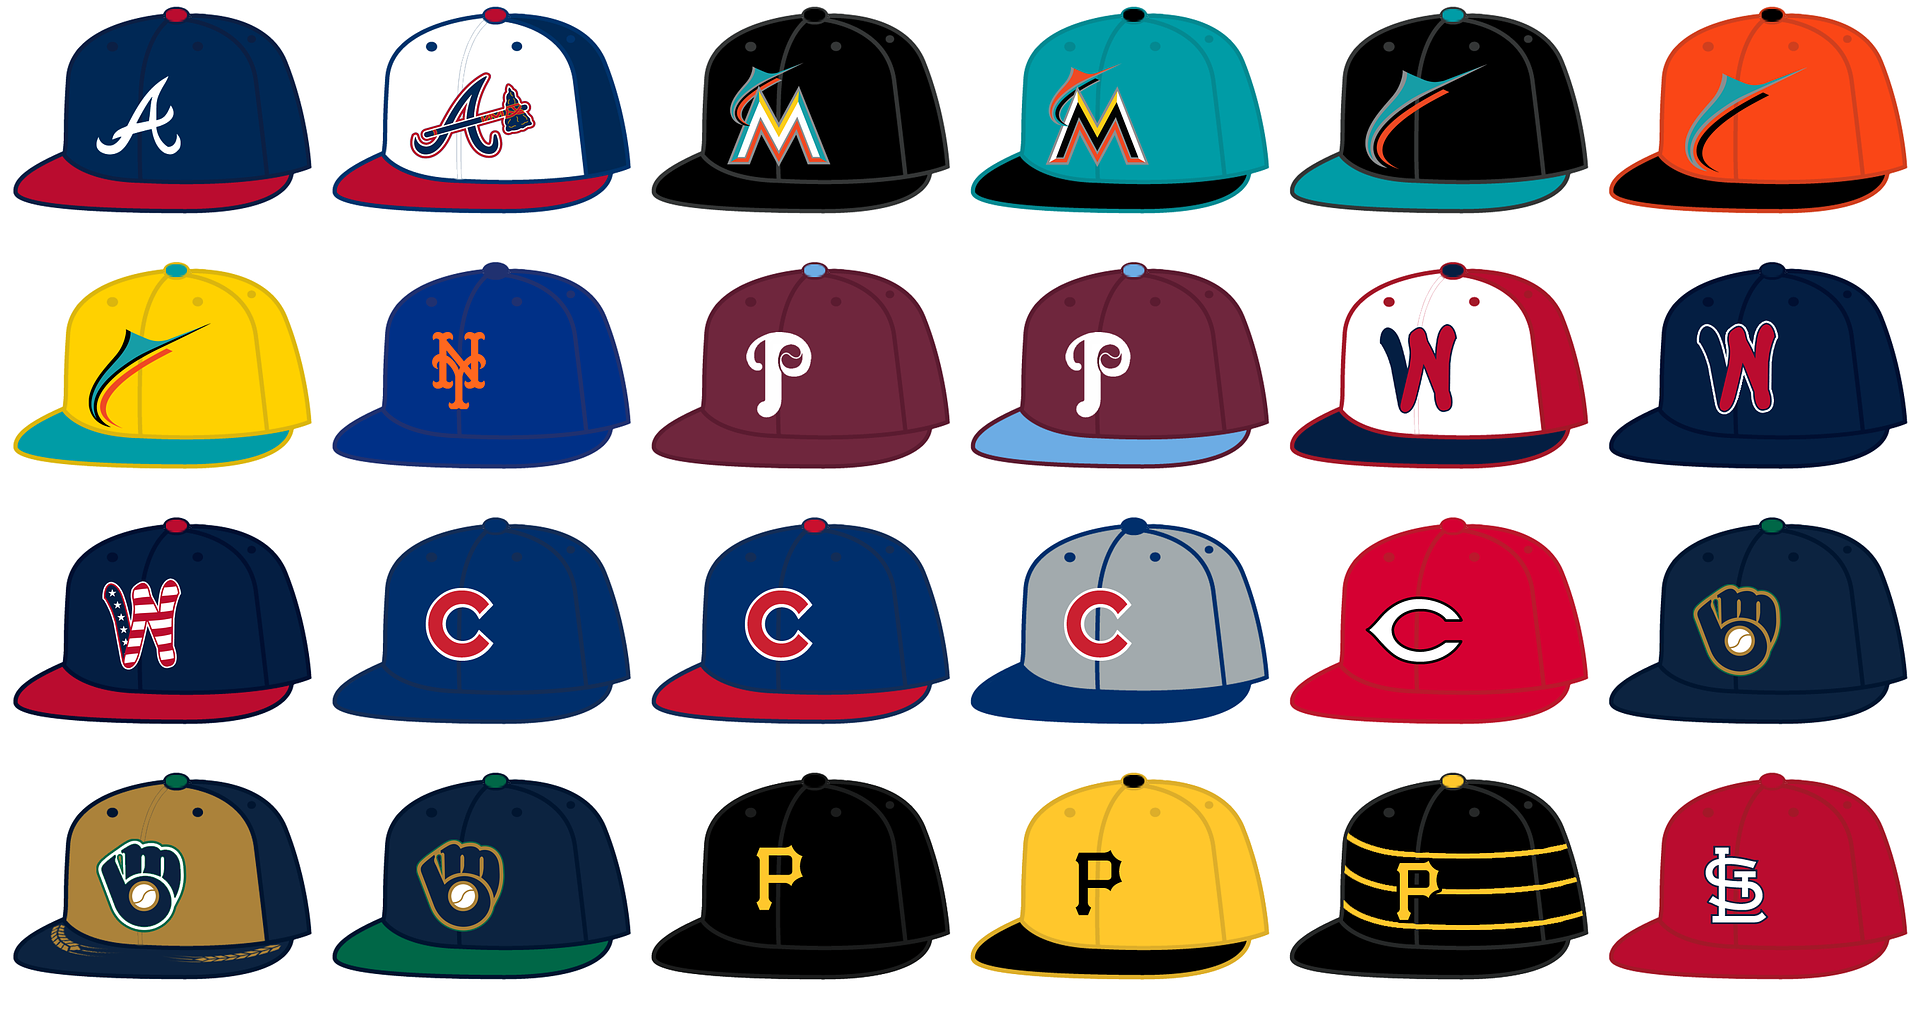 Hats1.png